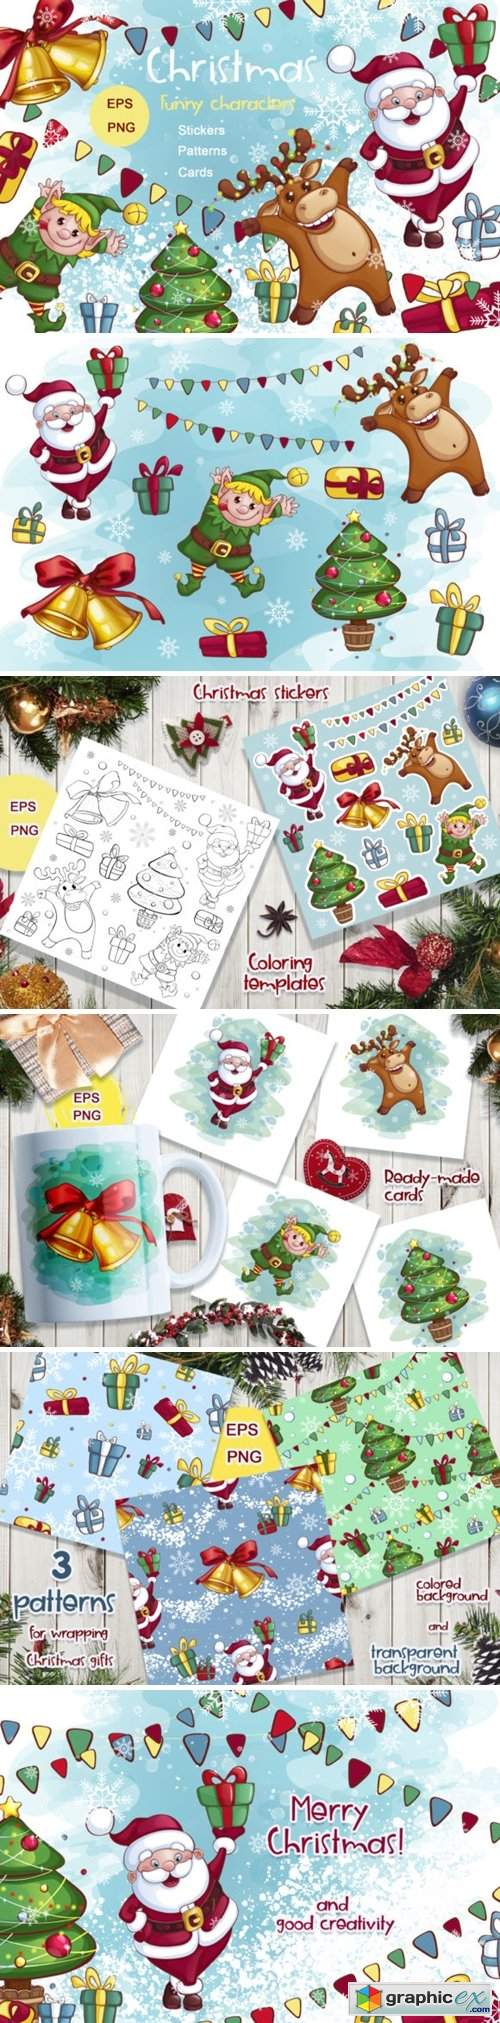  Christmas! Characters, Stickers, Cards 